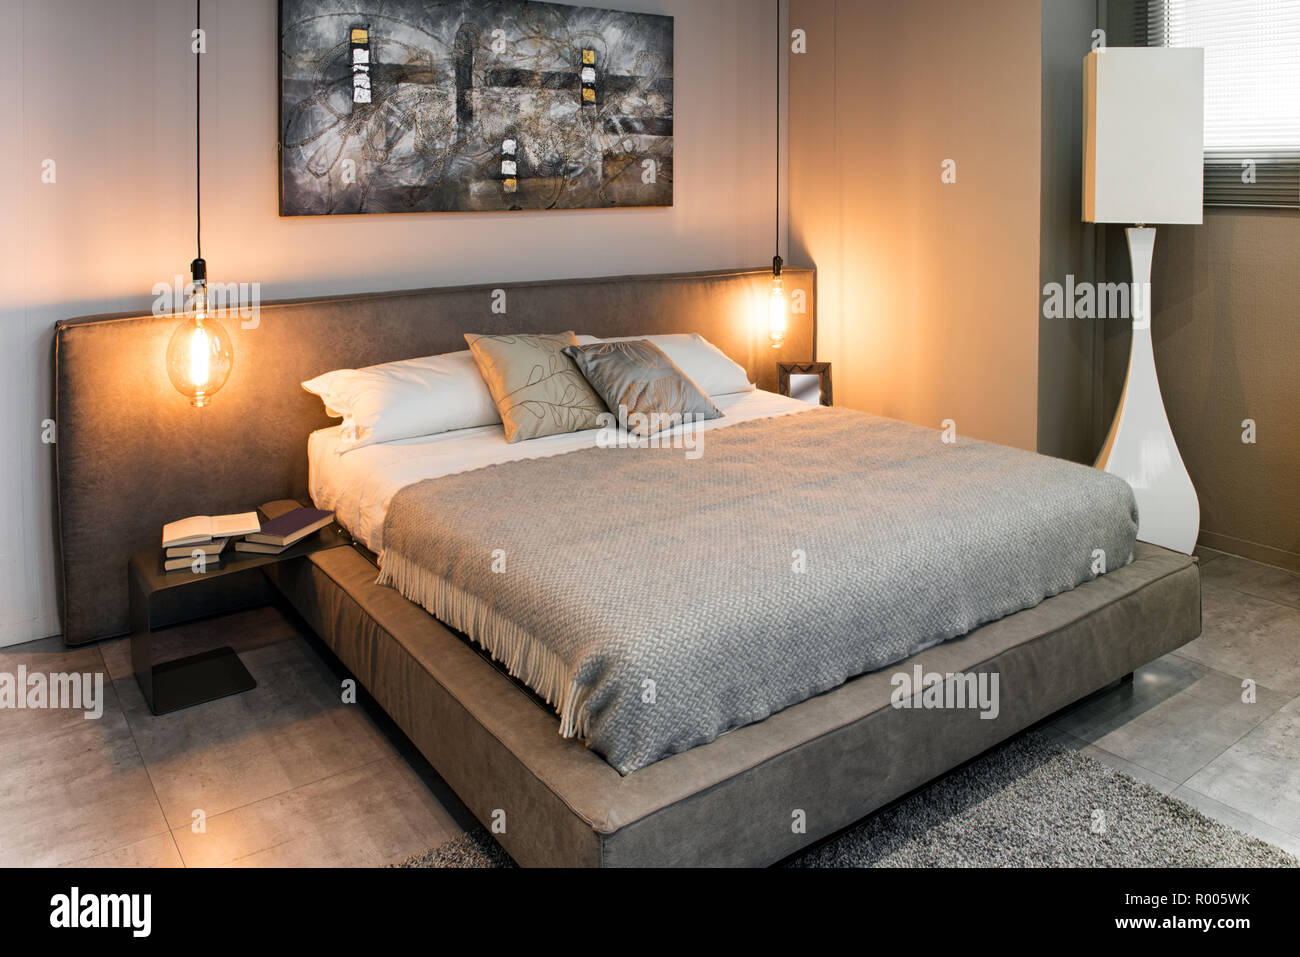 View Of Double Bed With Grey Linens In Cozy Interior With Warm